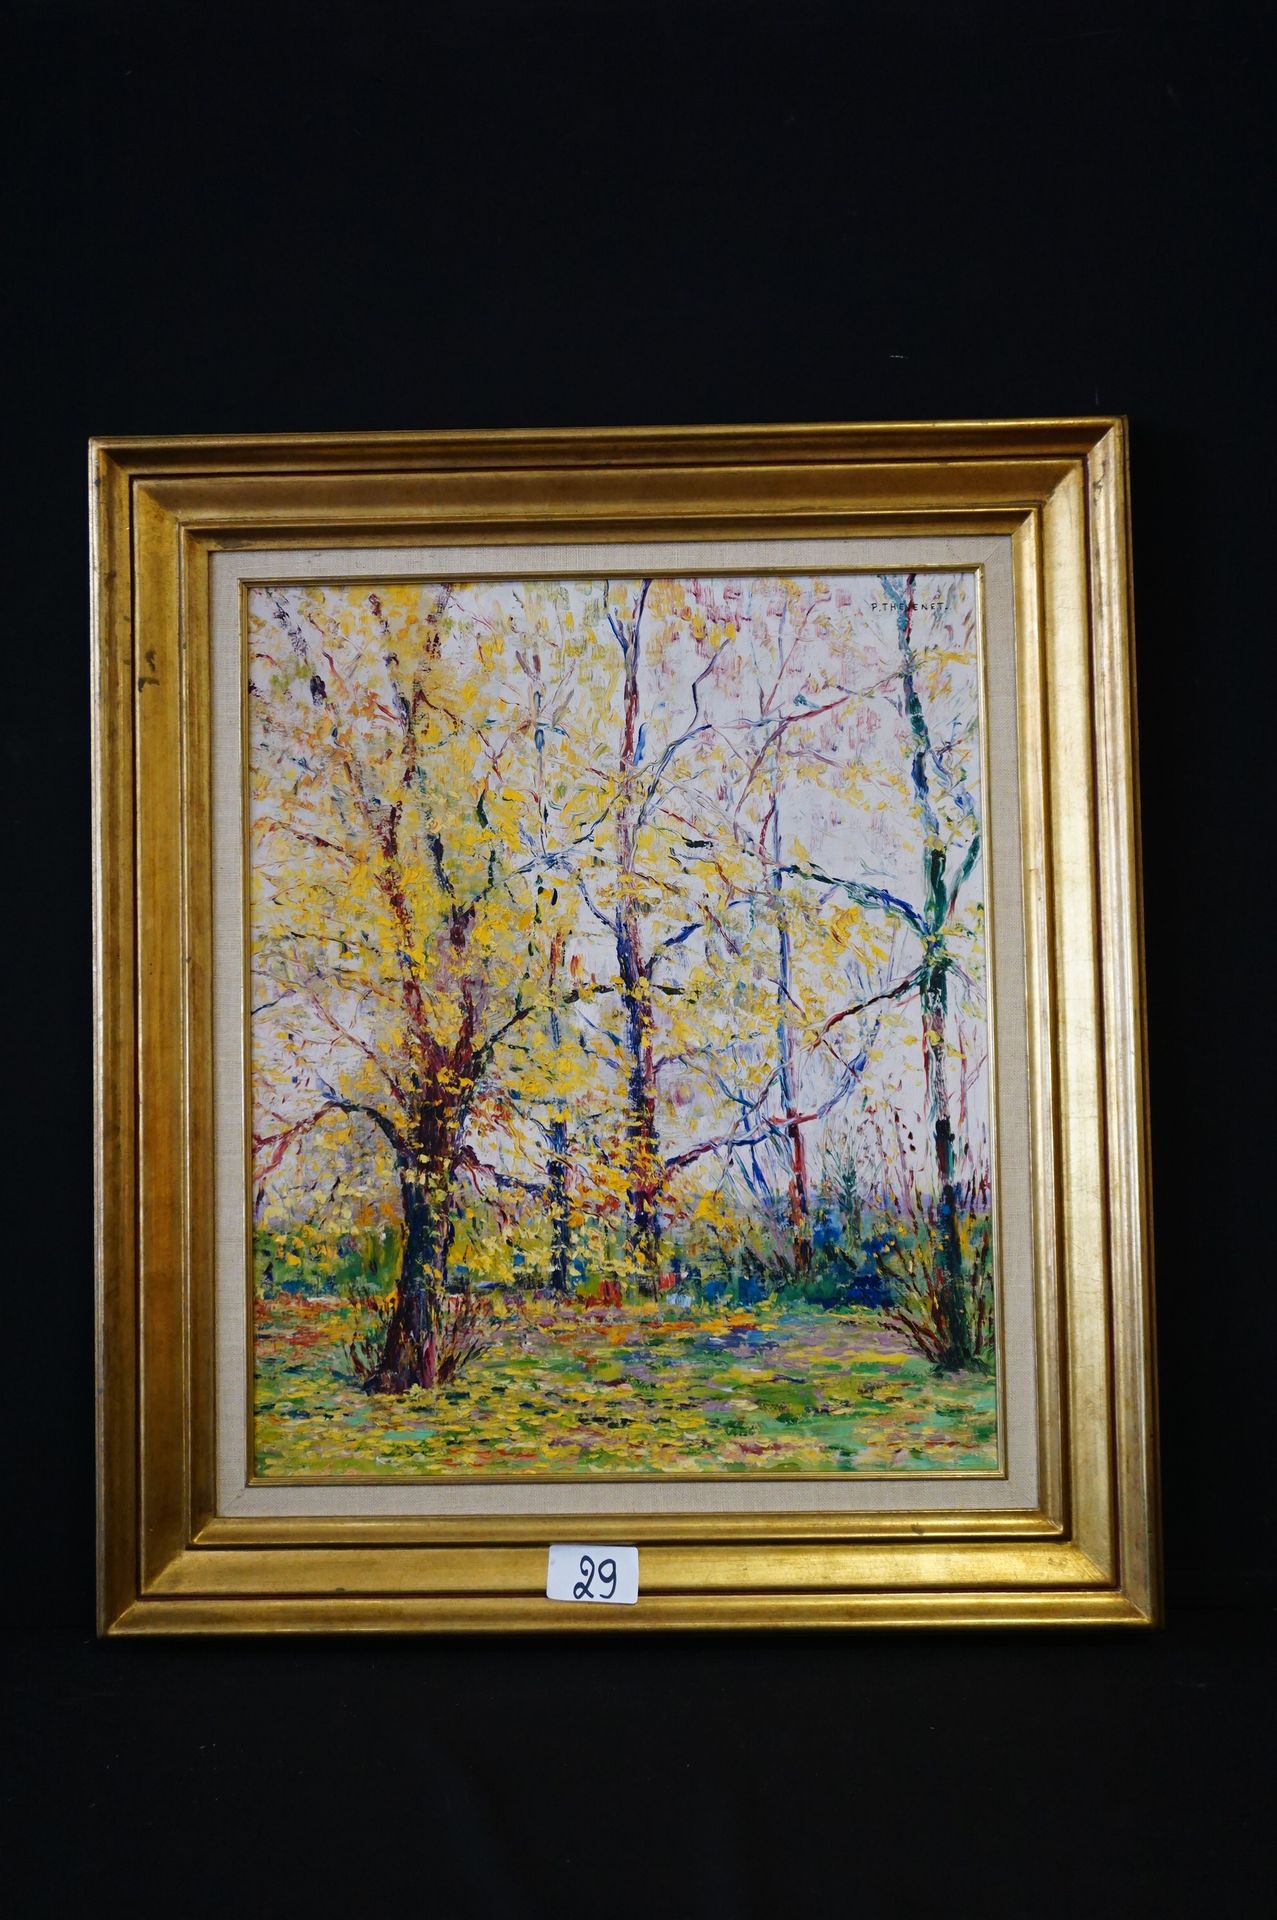 Pierre THEVENET (1870 - 1937) Autumn colors" - Oil on canvas - Signed in the upp&hellip;